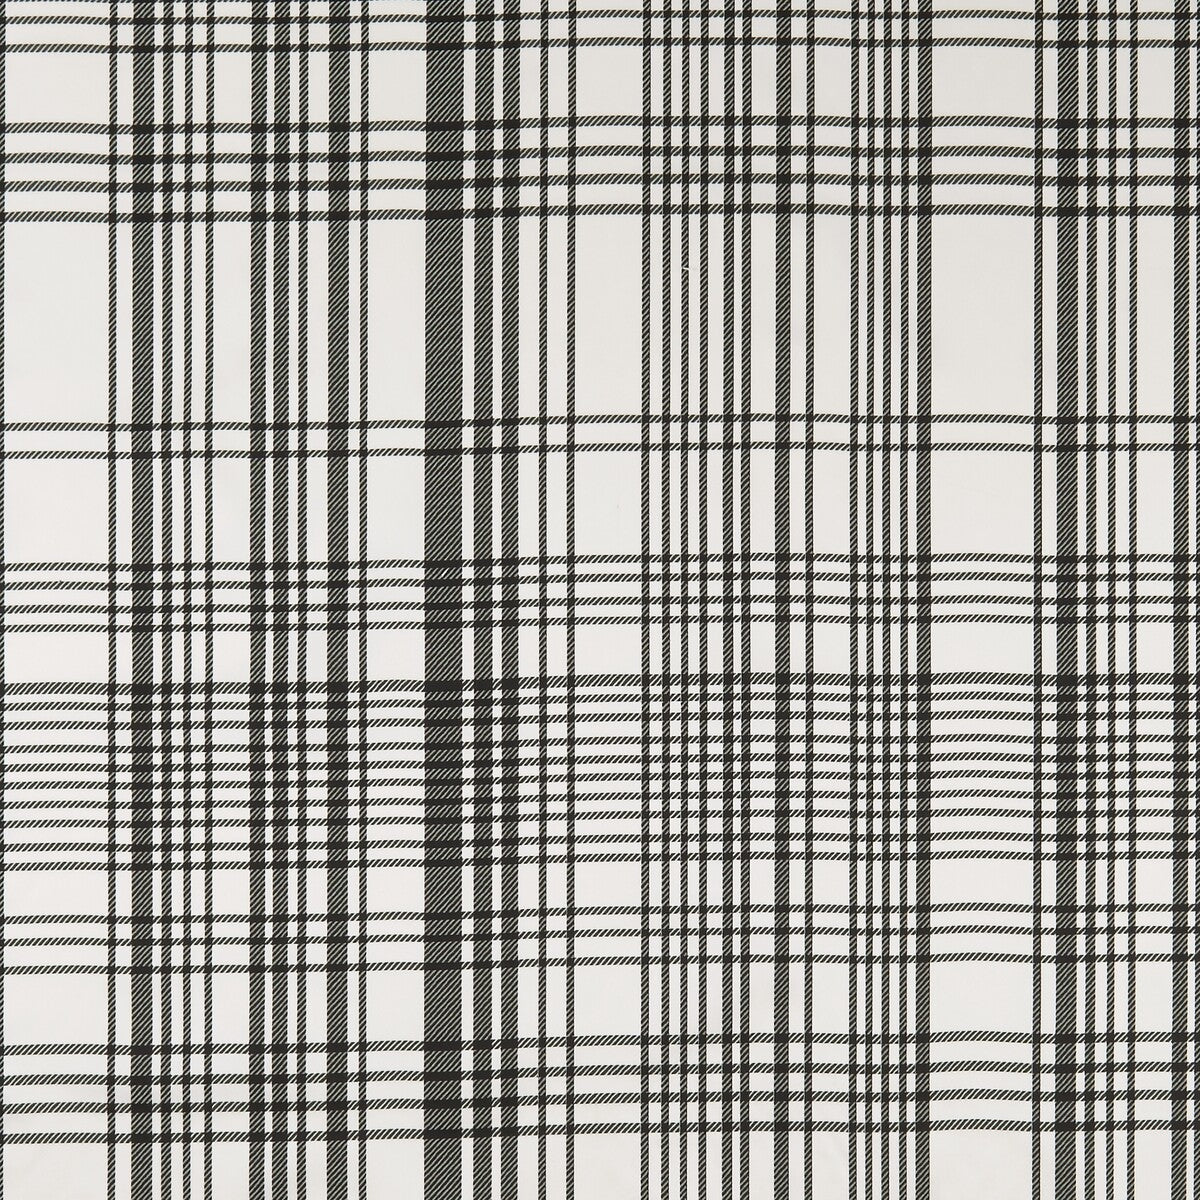 Bw1006 fabric in black/white color - pattern F0878/01.CAC.0 - by Clarke And Clarke in the Clarke &amp; Clarke Black + White collection